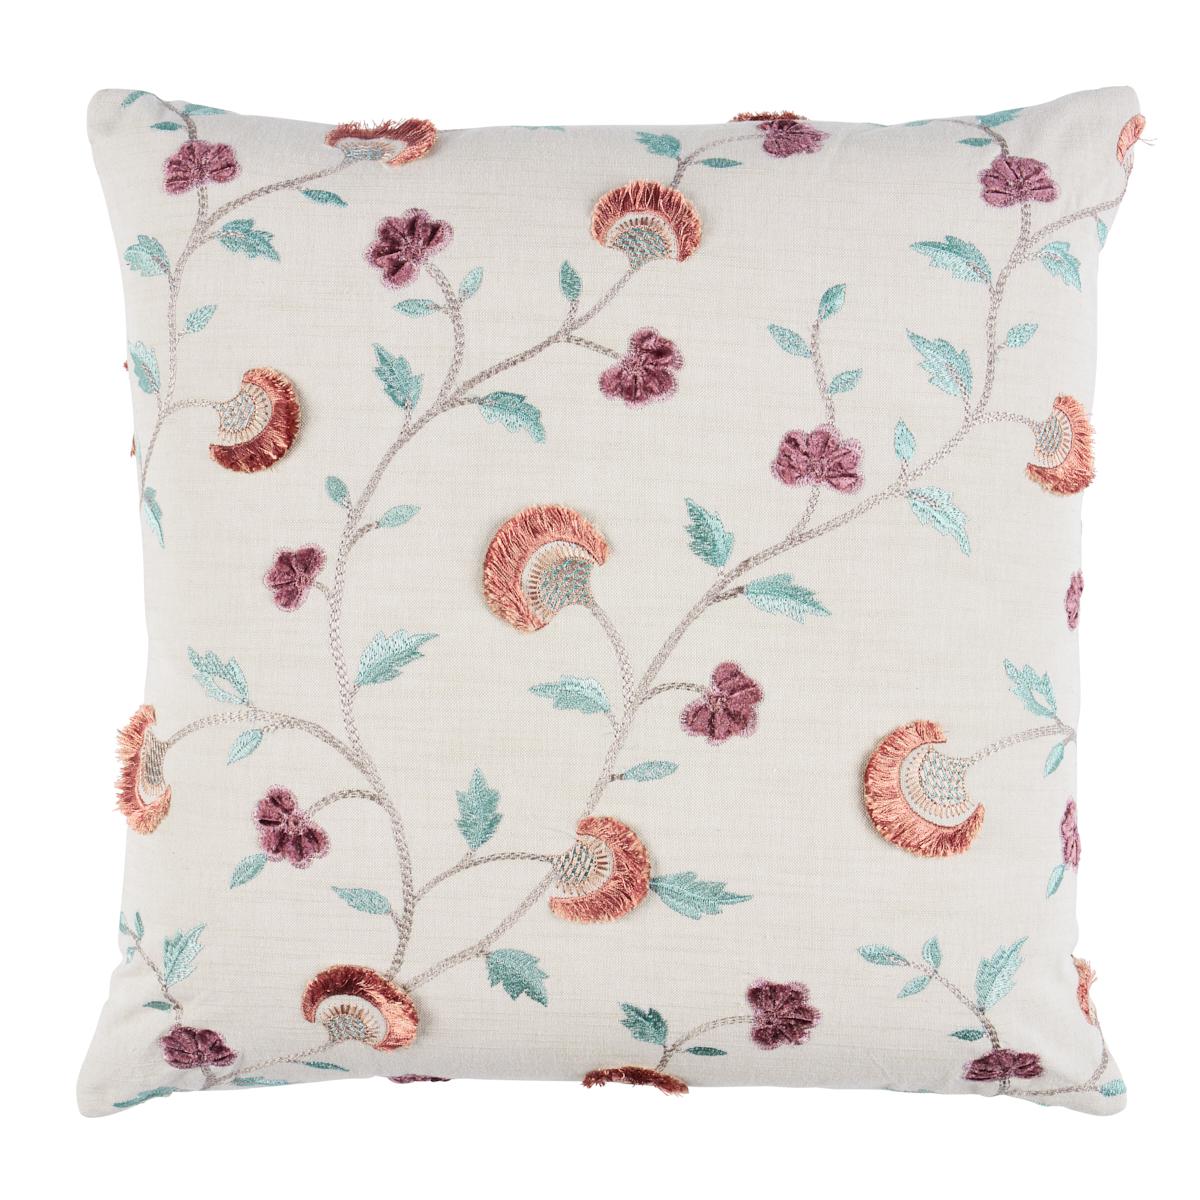 Iyla Embroidery Pillow in Rose & Natural 18 x 18"